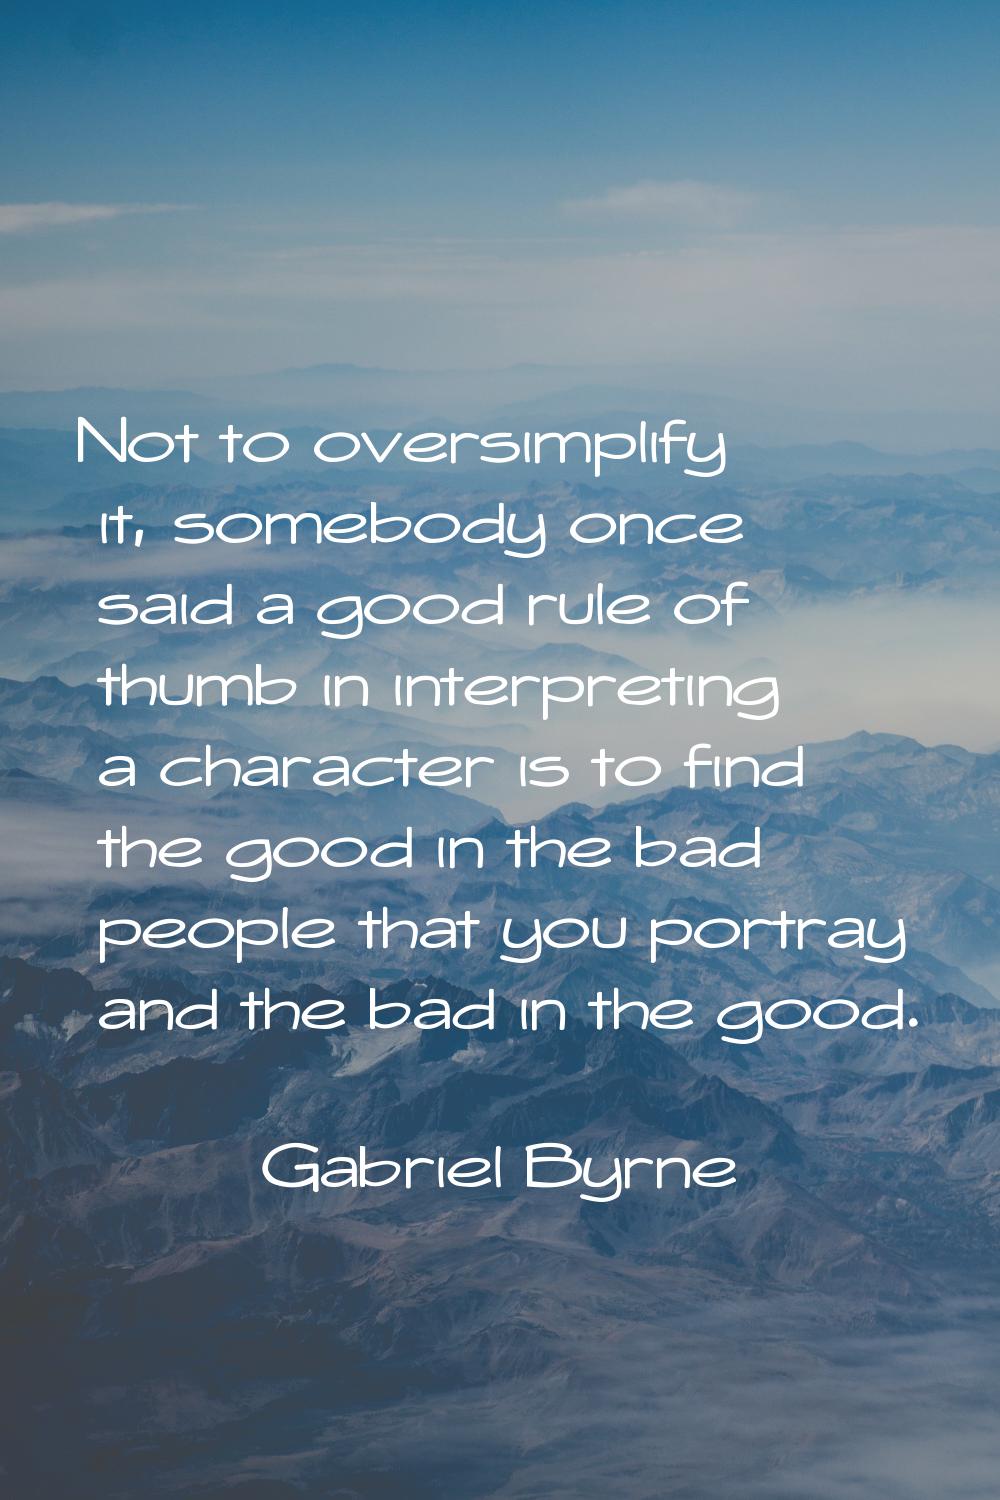 Not to oversimplify it, somebody once said a good rule of thumb in interpreting a character is to f